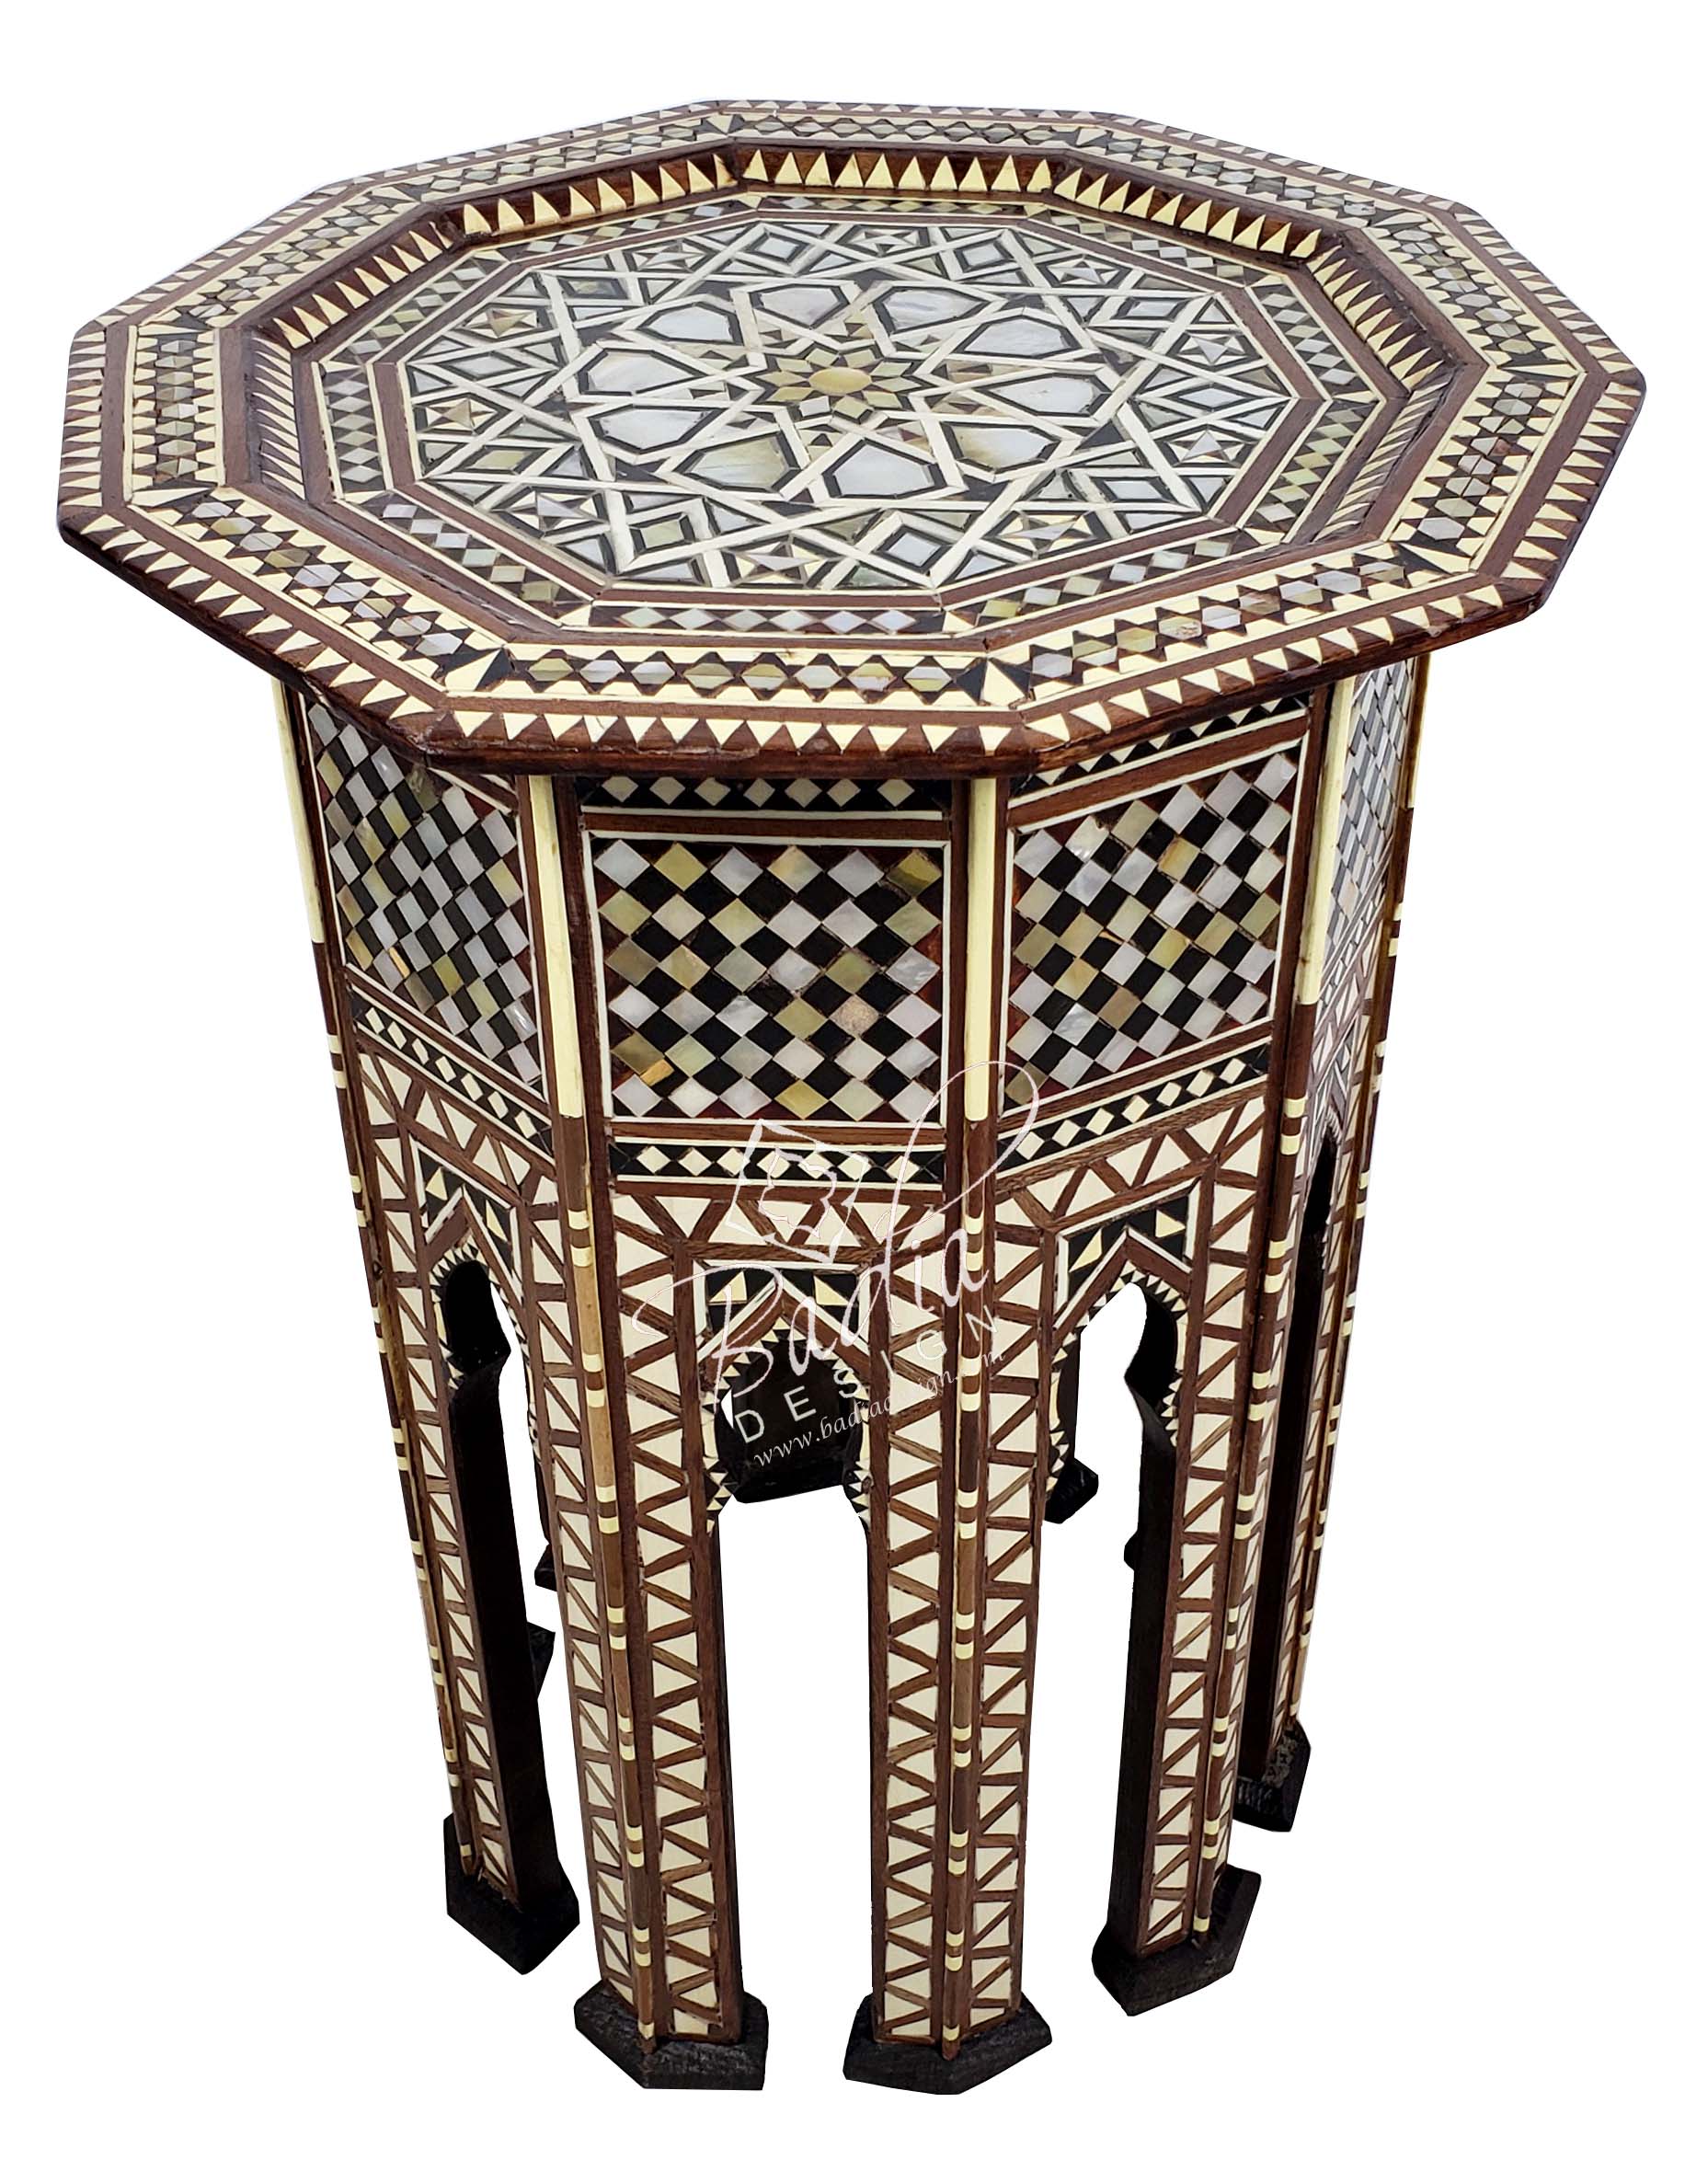 syrian-design-inlaid-side-table-mop-st105-1.jpg